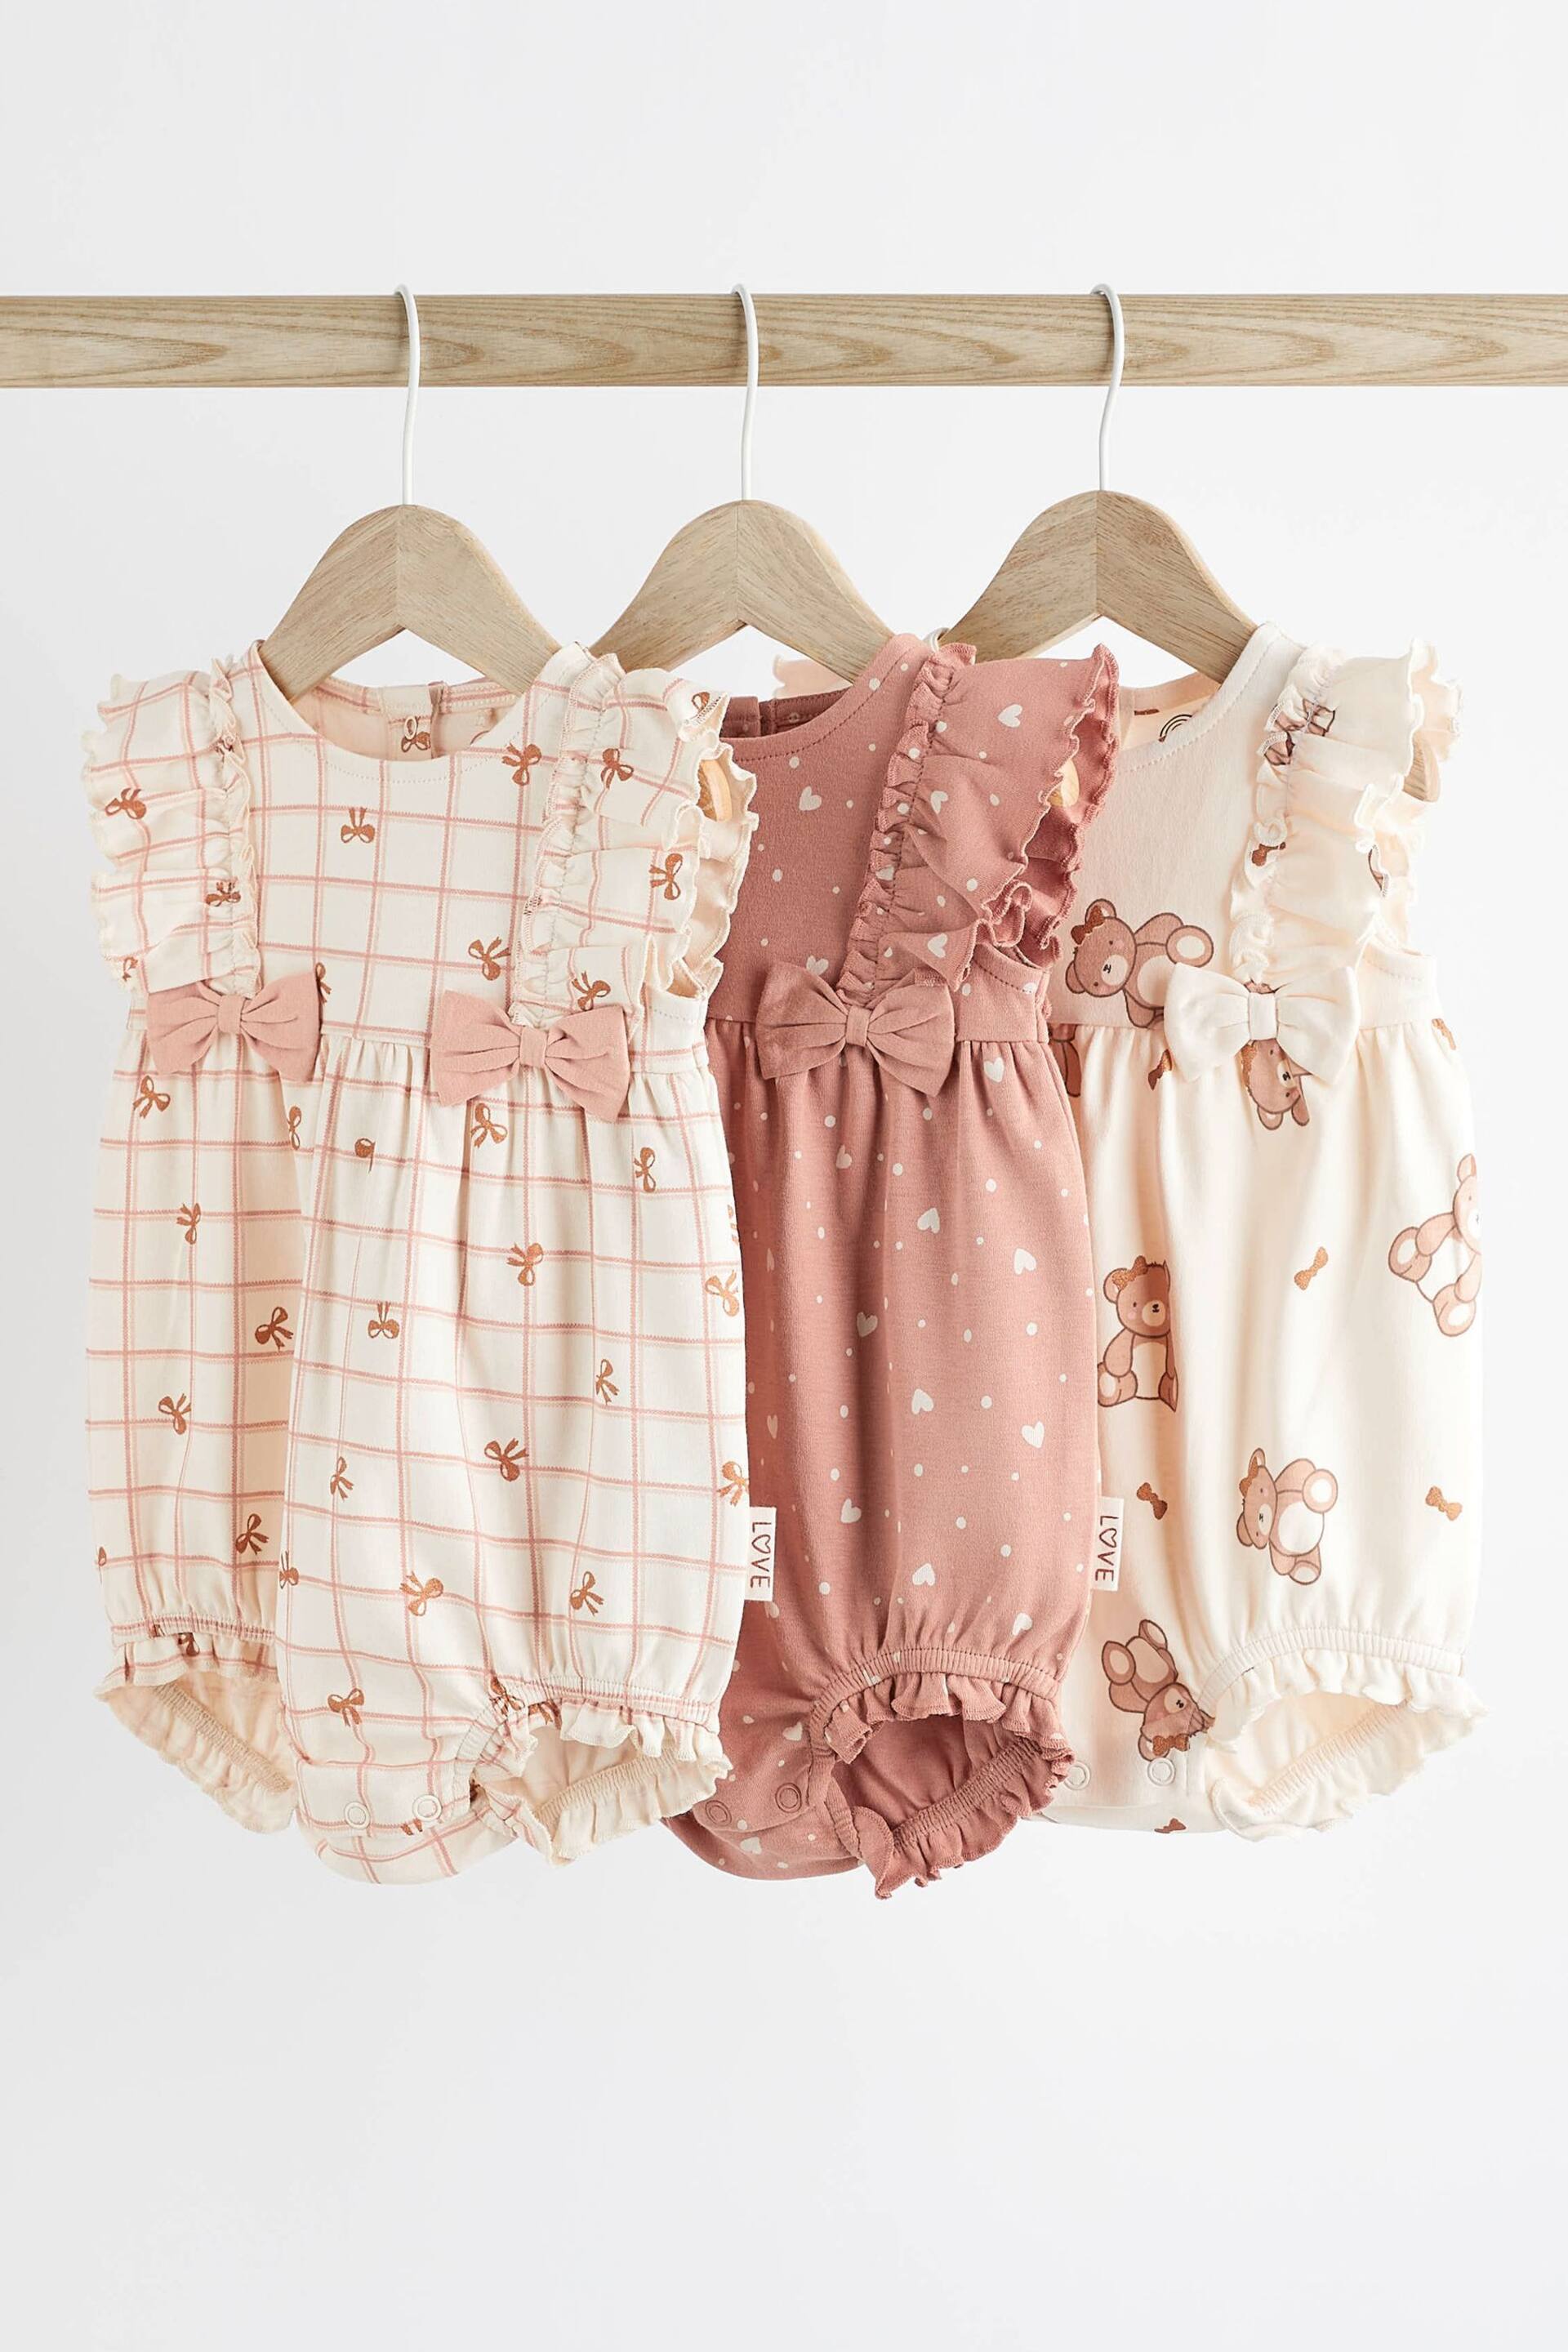 Pink/Cream Baby Rompers 3 Pack - Image 1 of 7